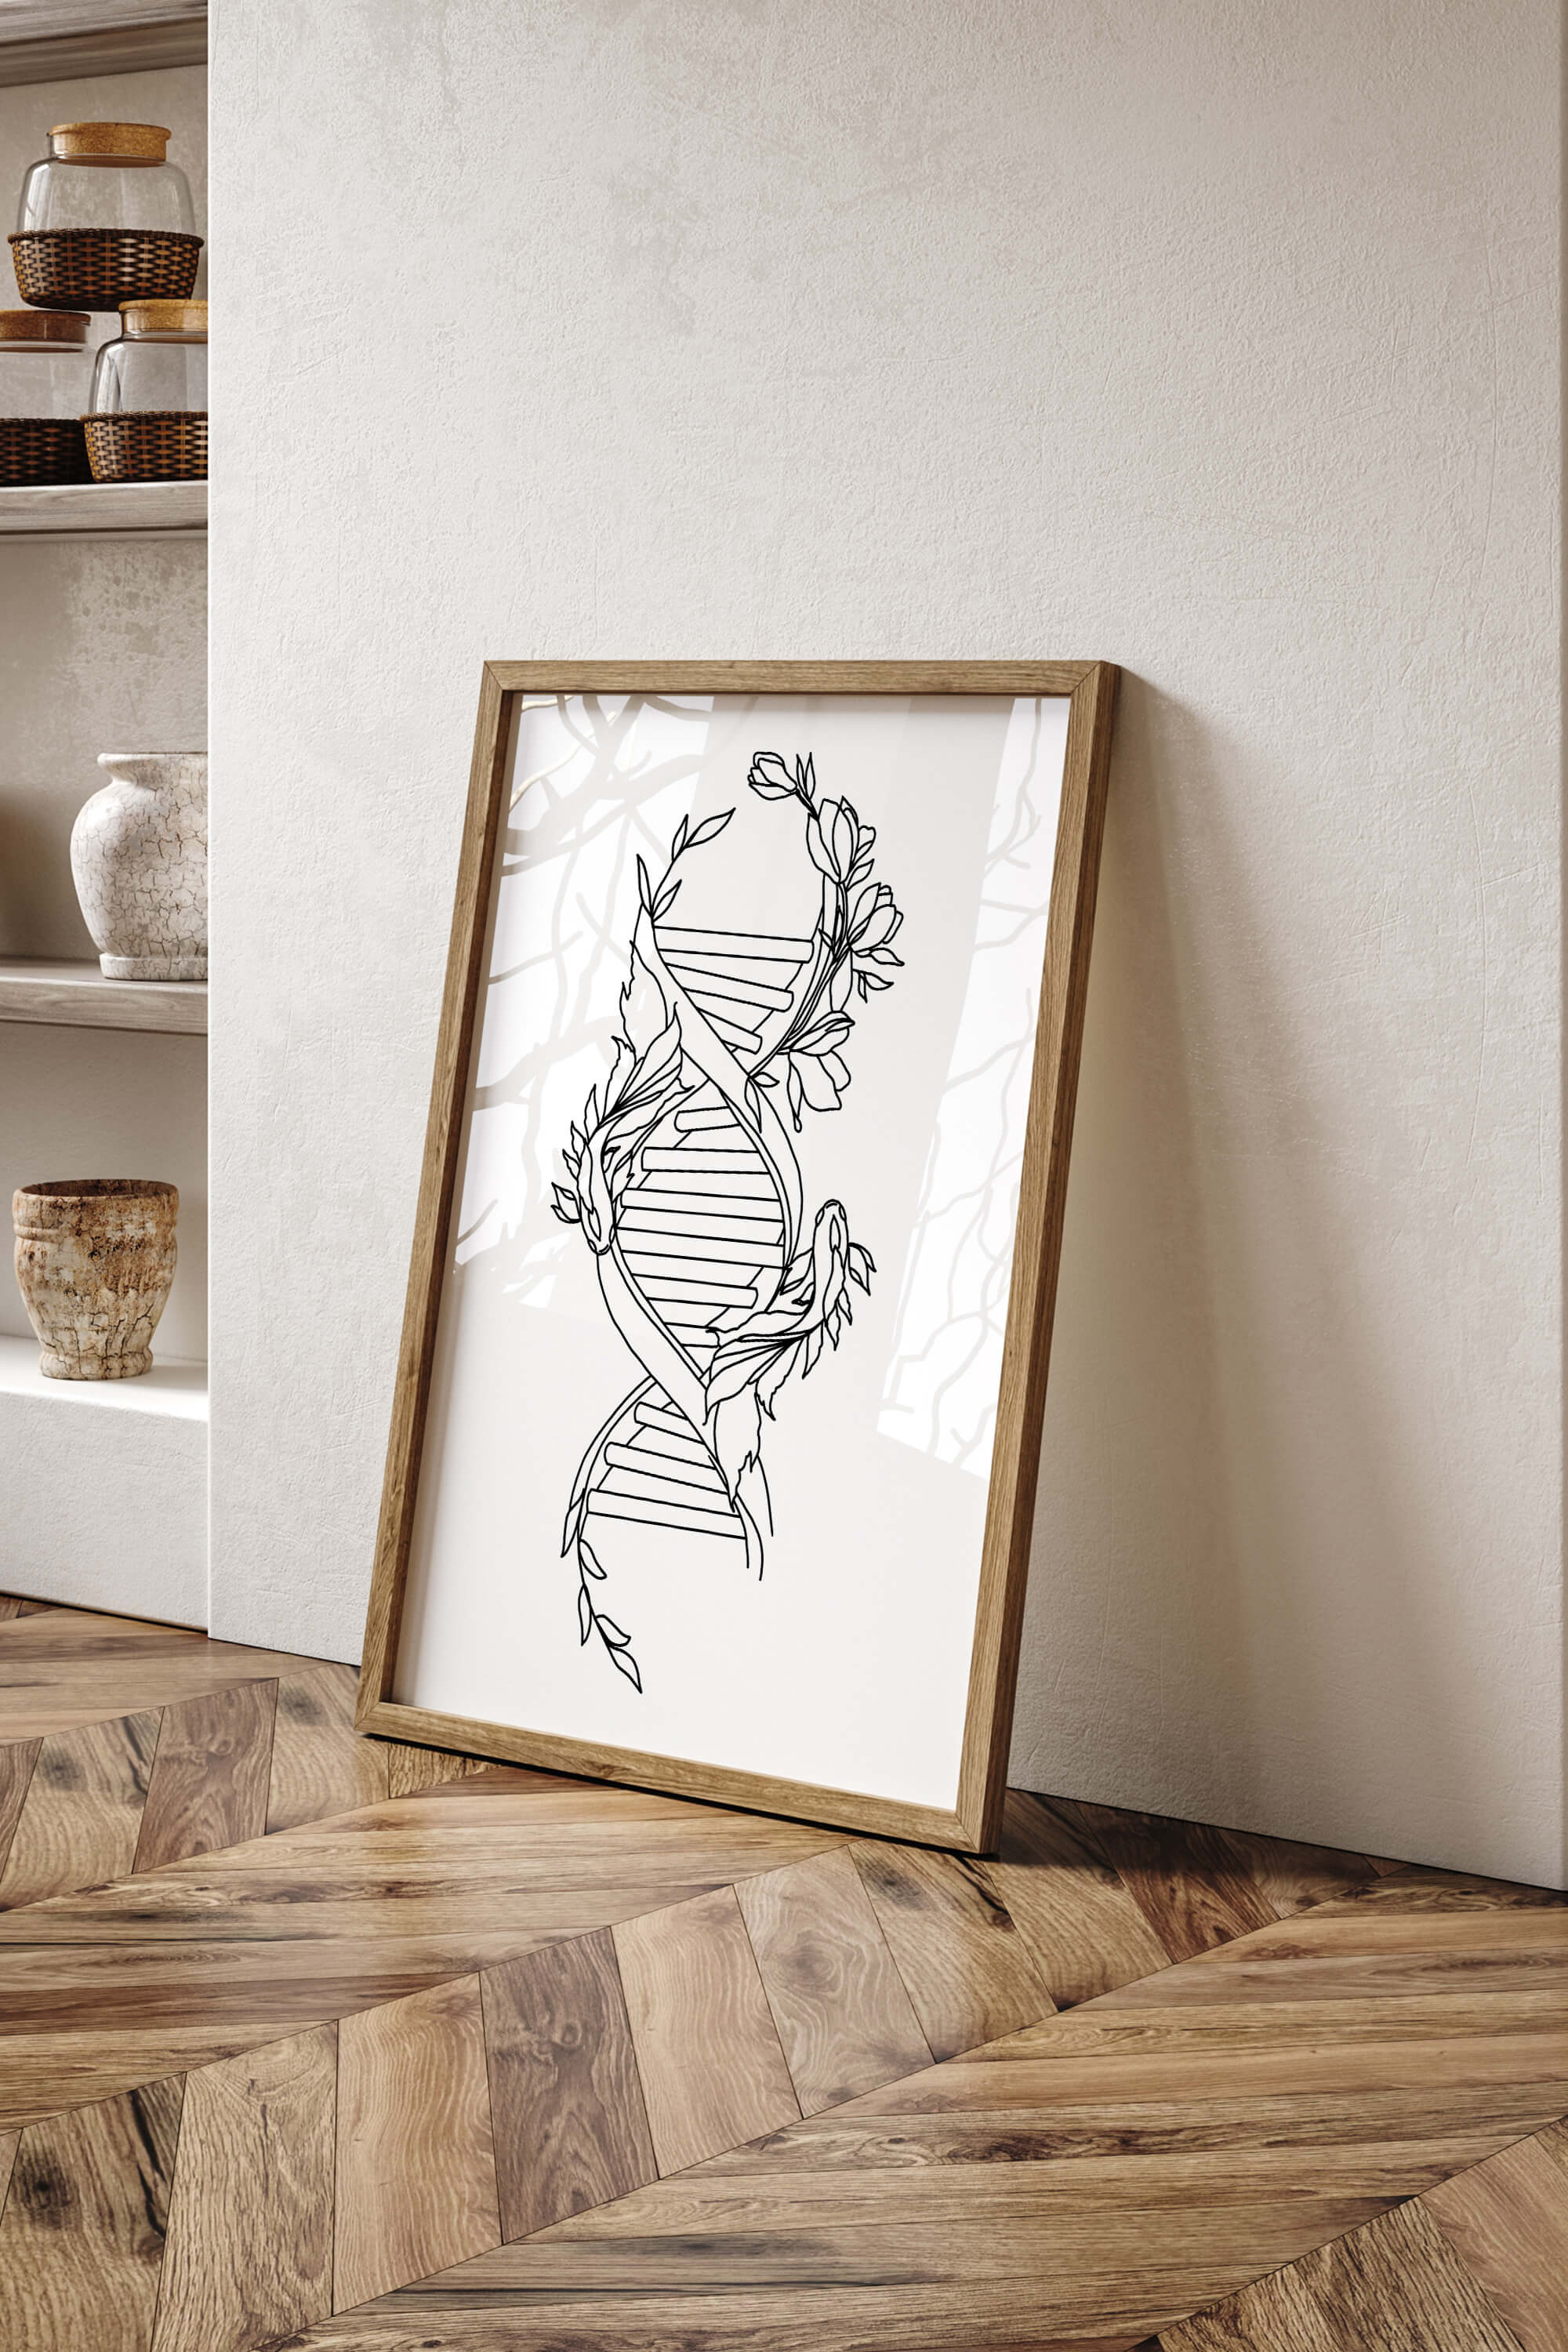 Captivating visual storytelling through intricate details in this science room wall art.